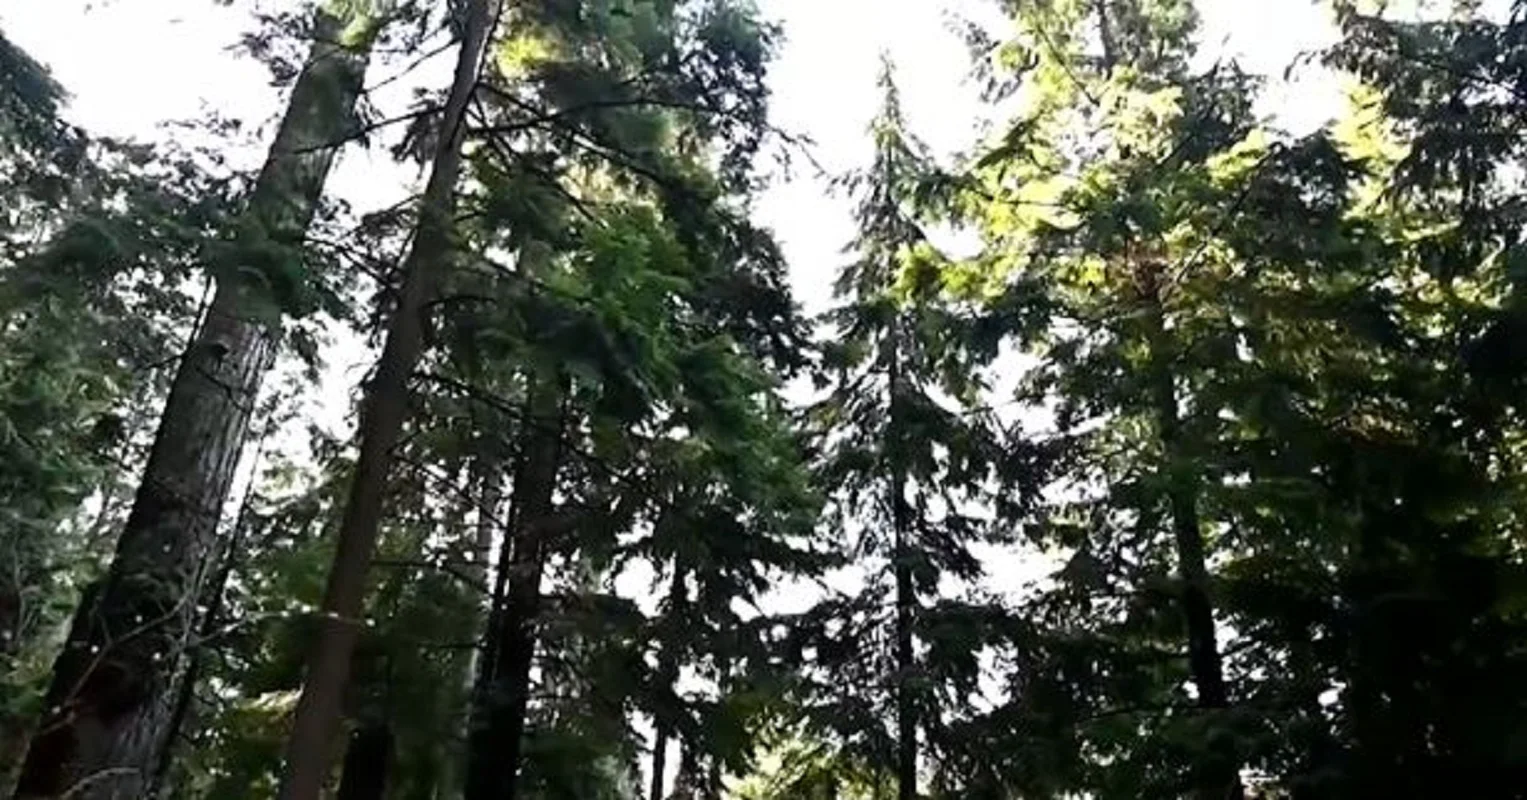 'Talking trees' come alive in B.C.'s Stanley Park